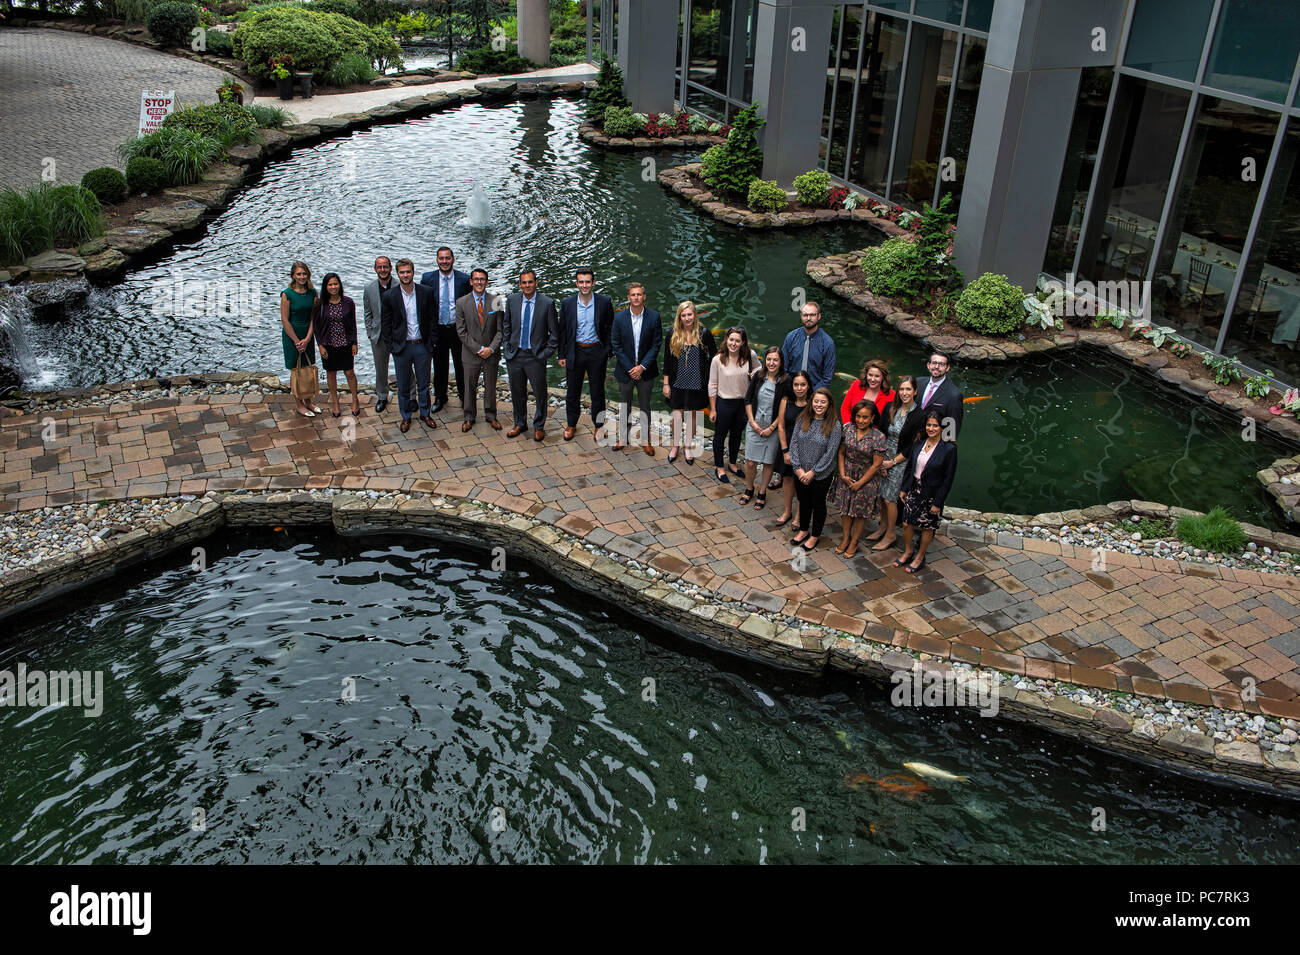 UNITED STATES: July 31, 2018: People that attended the Next Gen luncheon at the 2941 Restaurant in Arlington Virginia pose for a photo at the koi fish Stock Photo